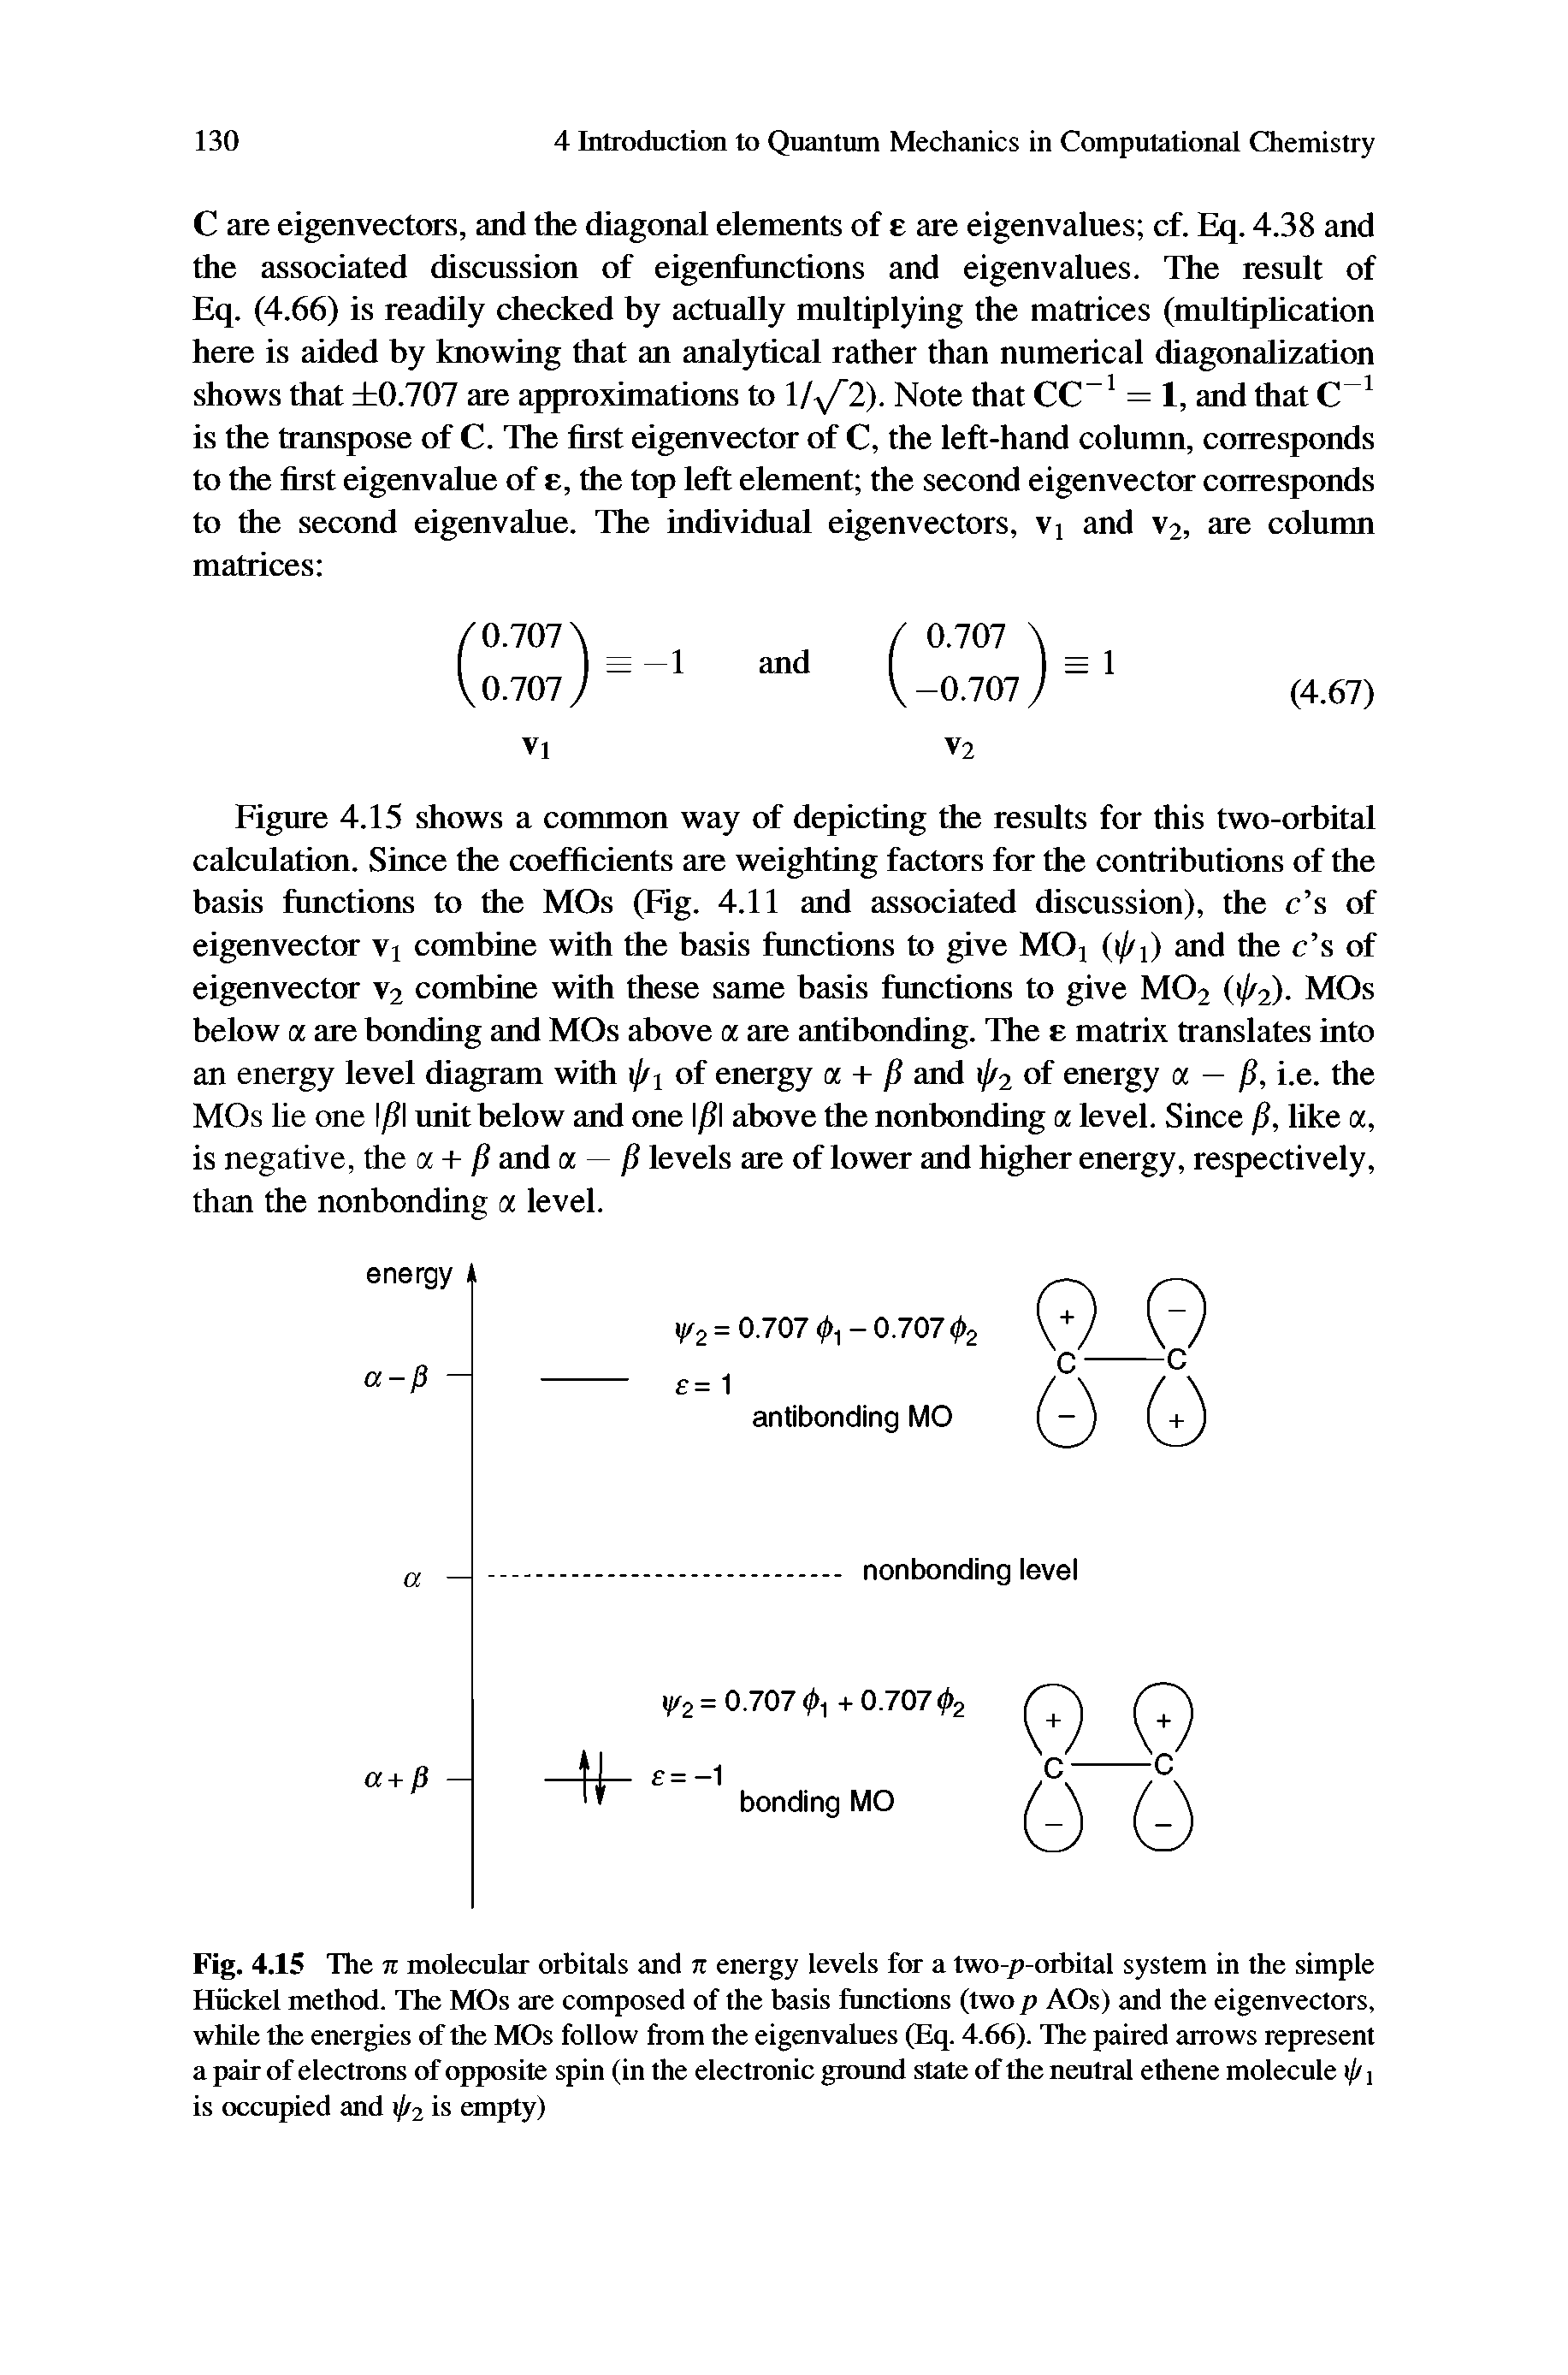 Fig. 4.15 The n molecular orbitals and n energy levels for a two-p-orbital system in the simple Hiickel method. The MOs are composed of the basis functions (two p AOs) and the eigenvectors, while the energies of the MOs follow from the eigenvalues (Eq. 4.66). The paired arrows represent a pair of electrons of opposite spin (in the electronic ground state of the neutral ethene molecule i[/ is occupied and i//2 is empty)...